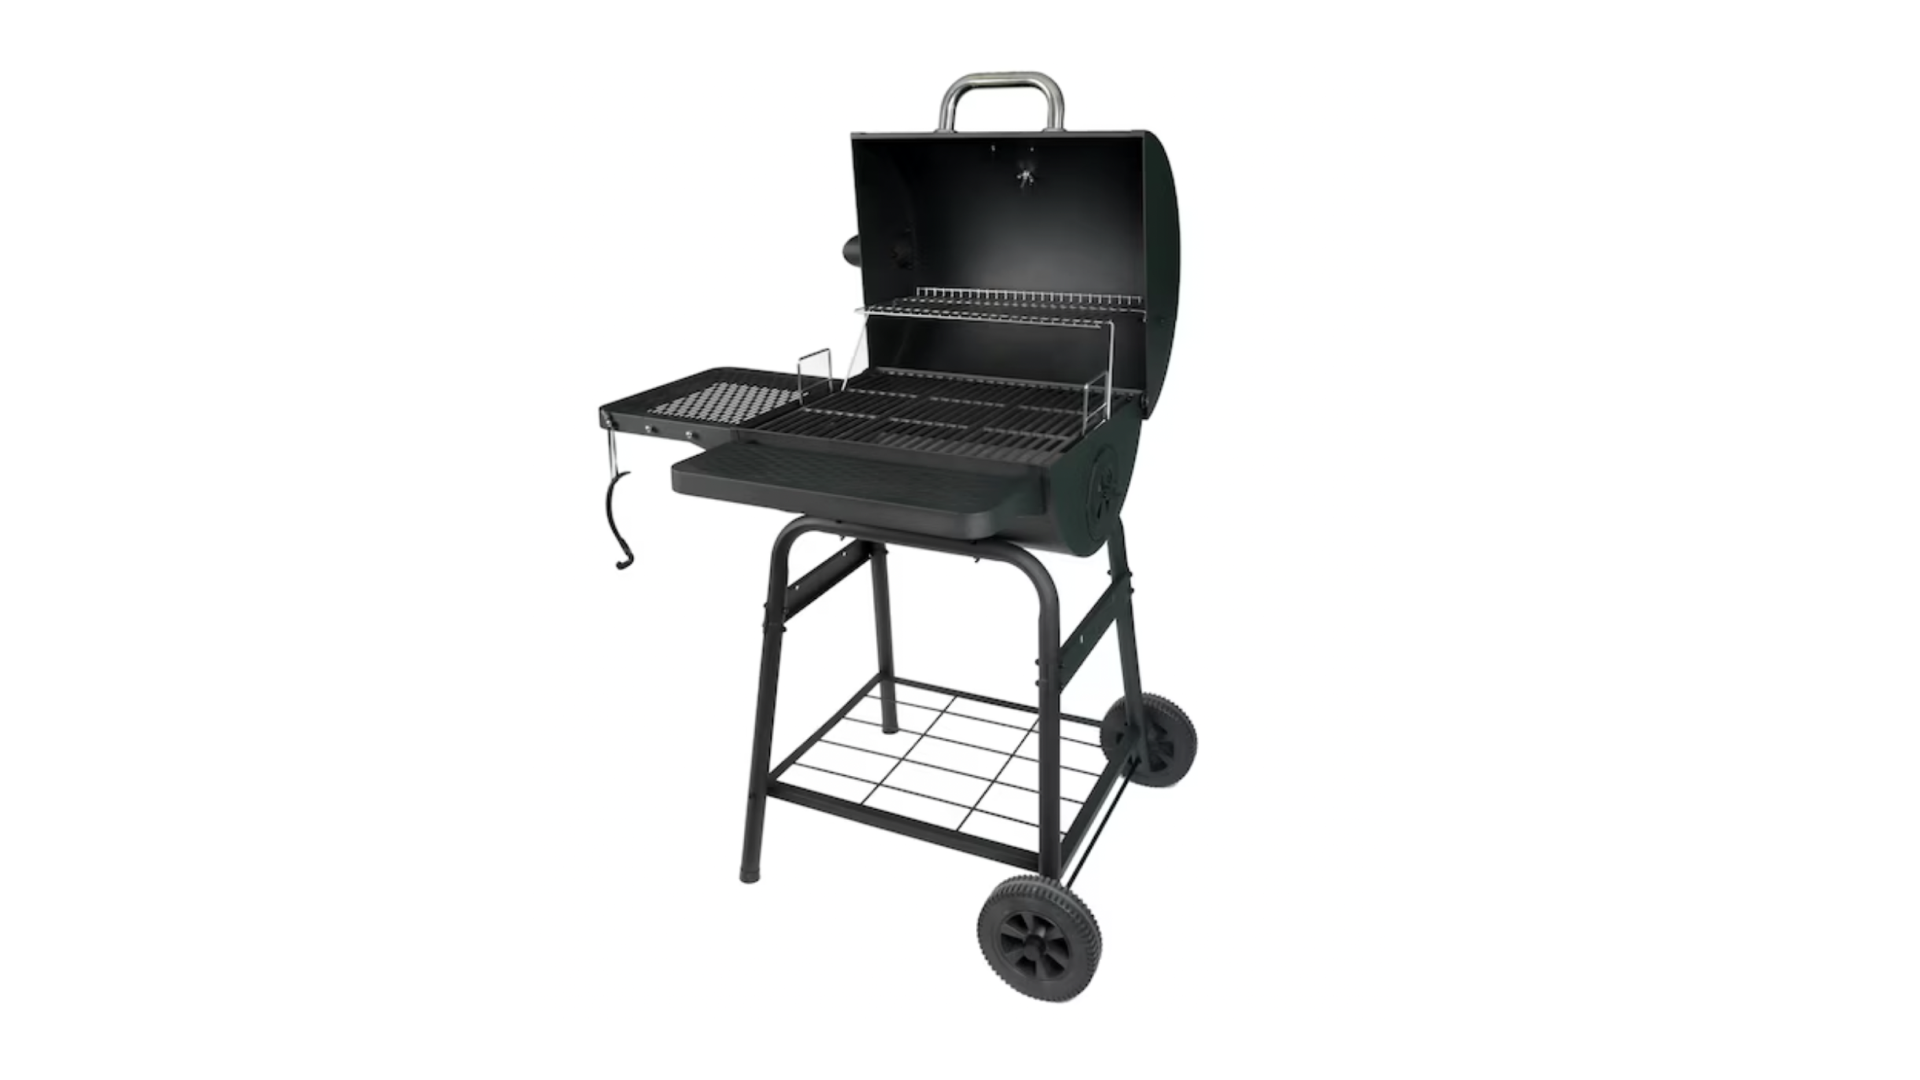 charcoal-grill